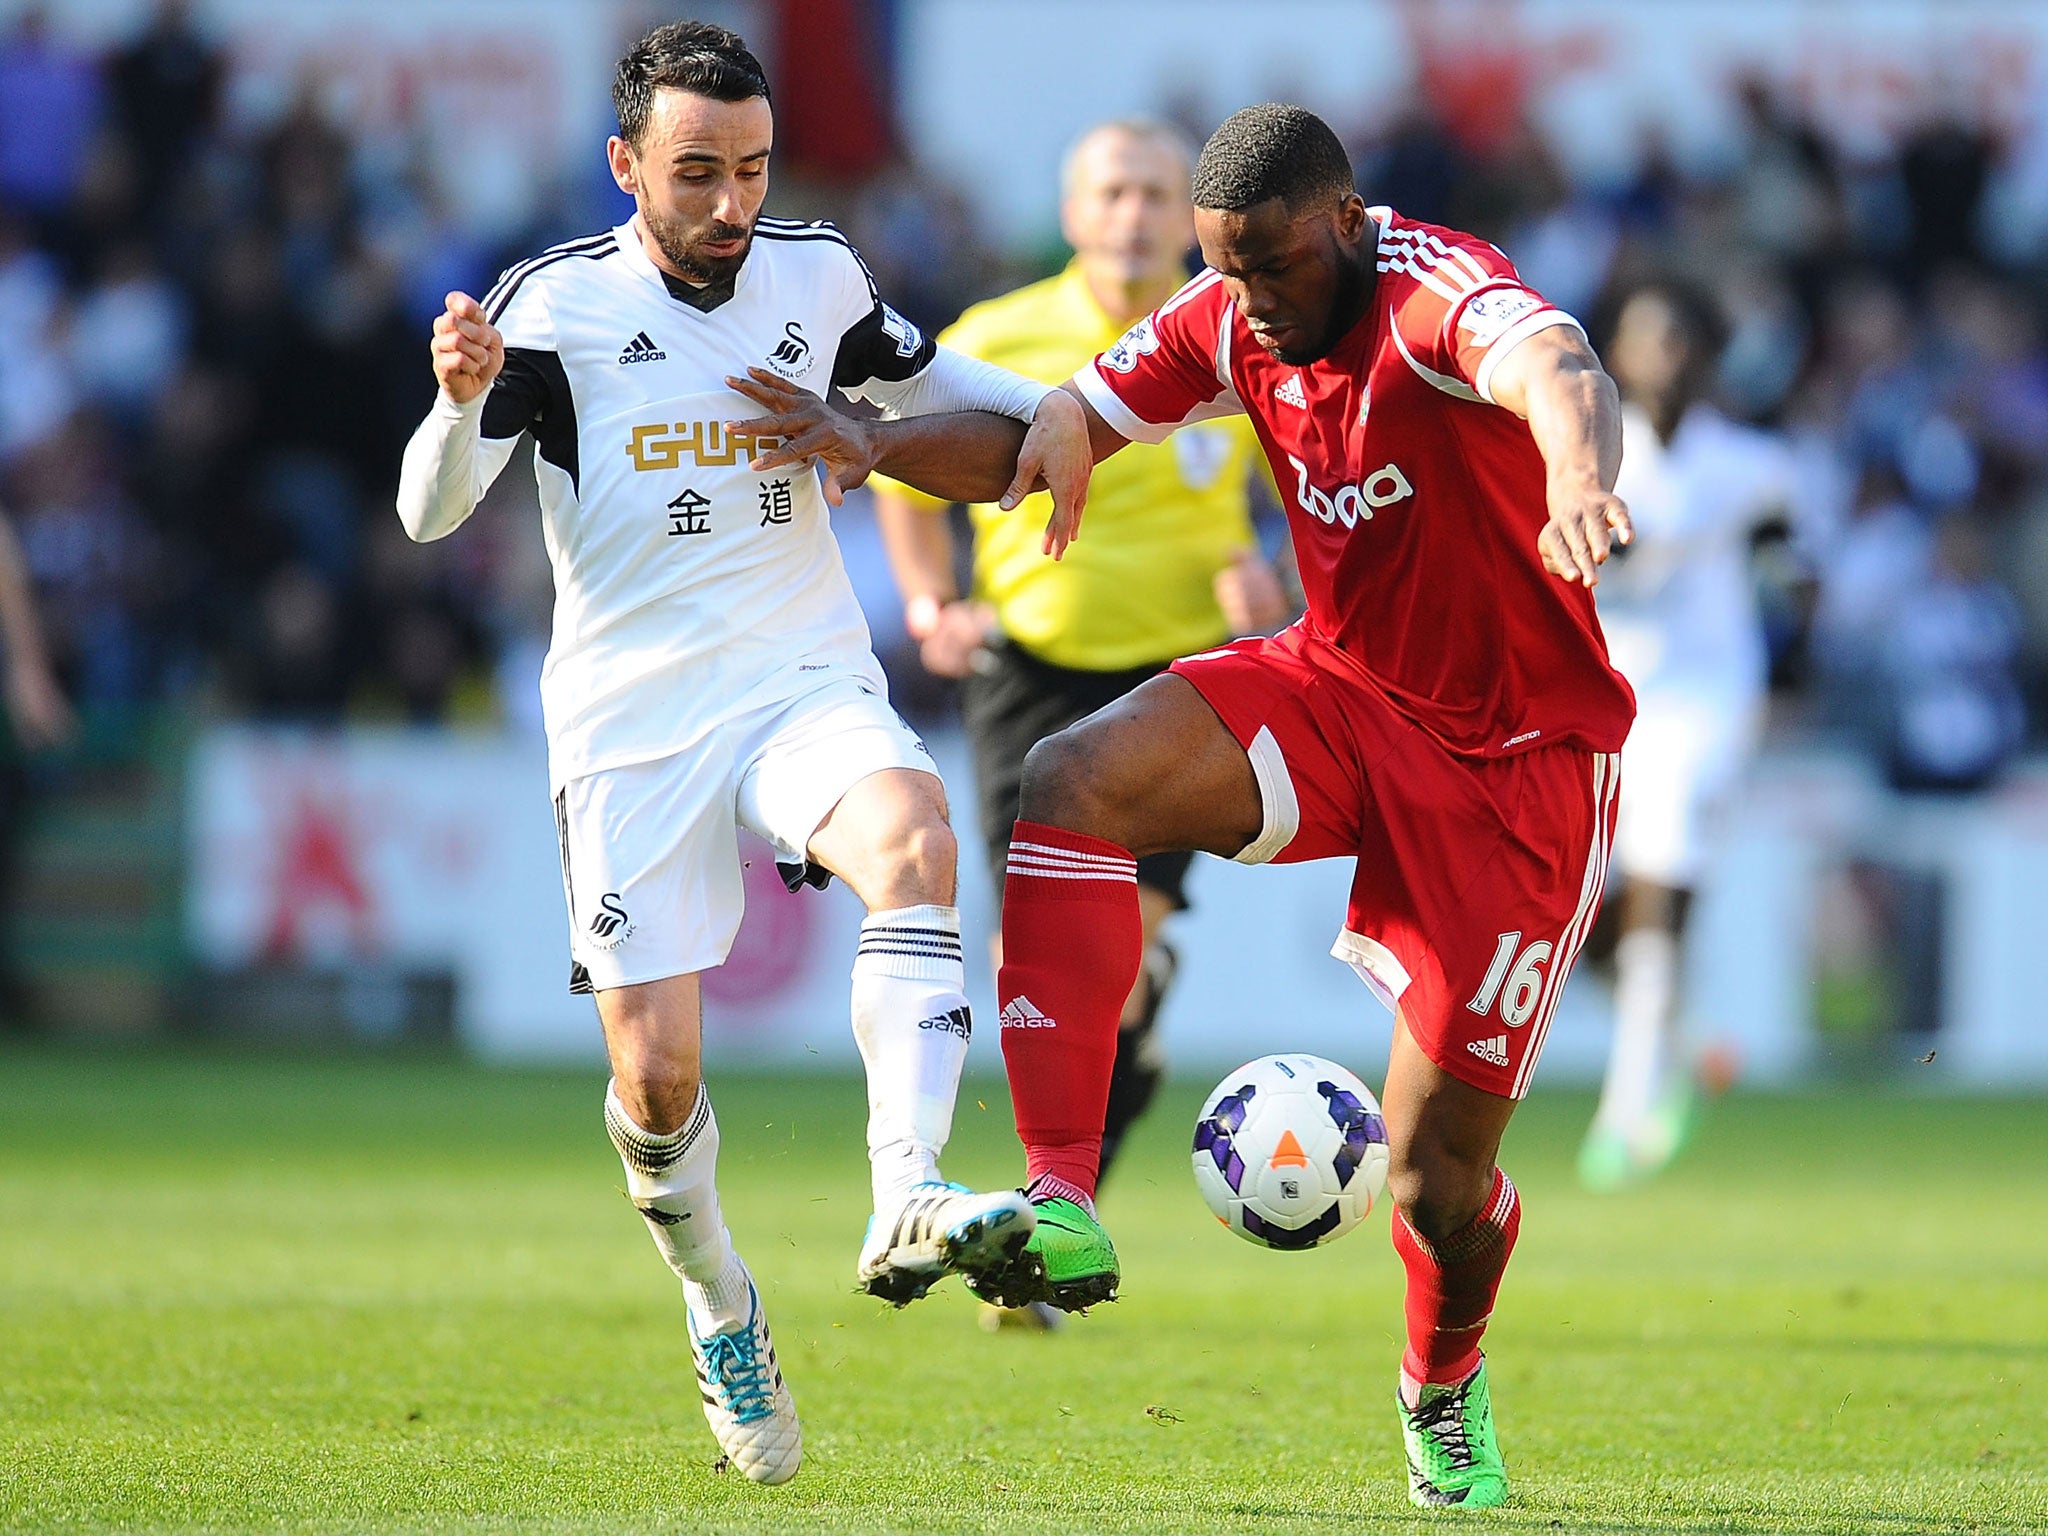 Leon Britton of Swansea City and Victor Anichebe of West Bromwich Albion